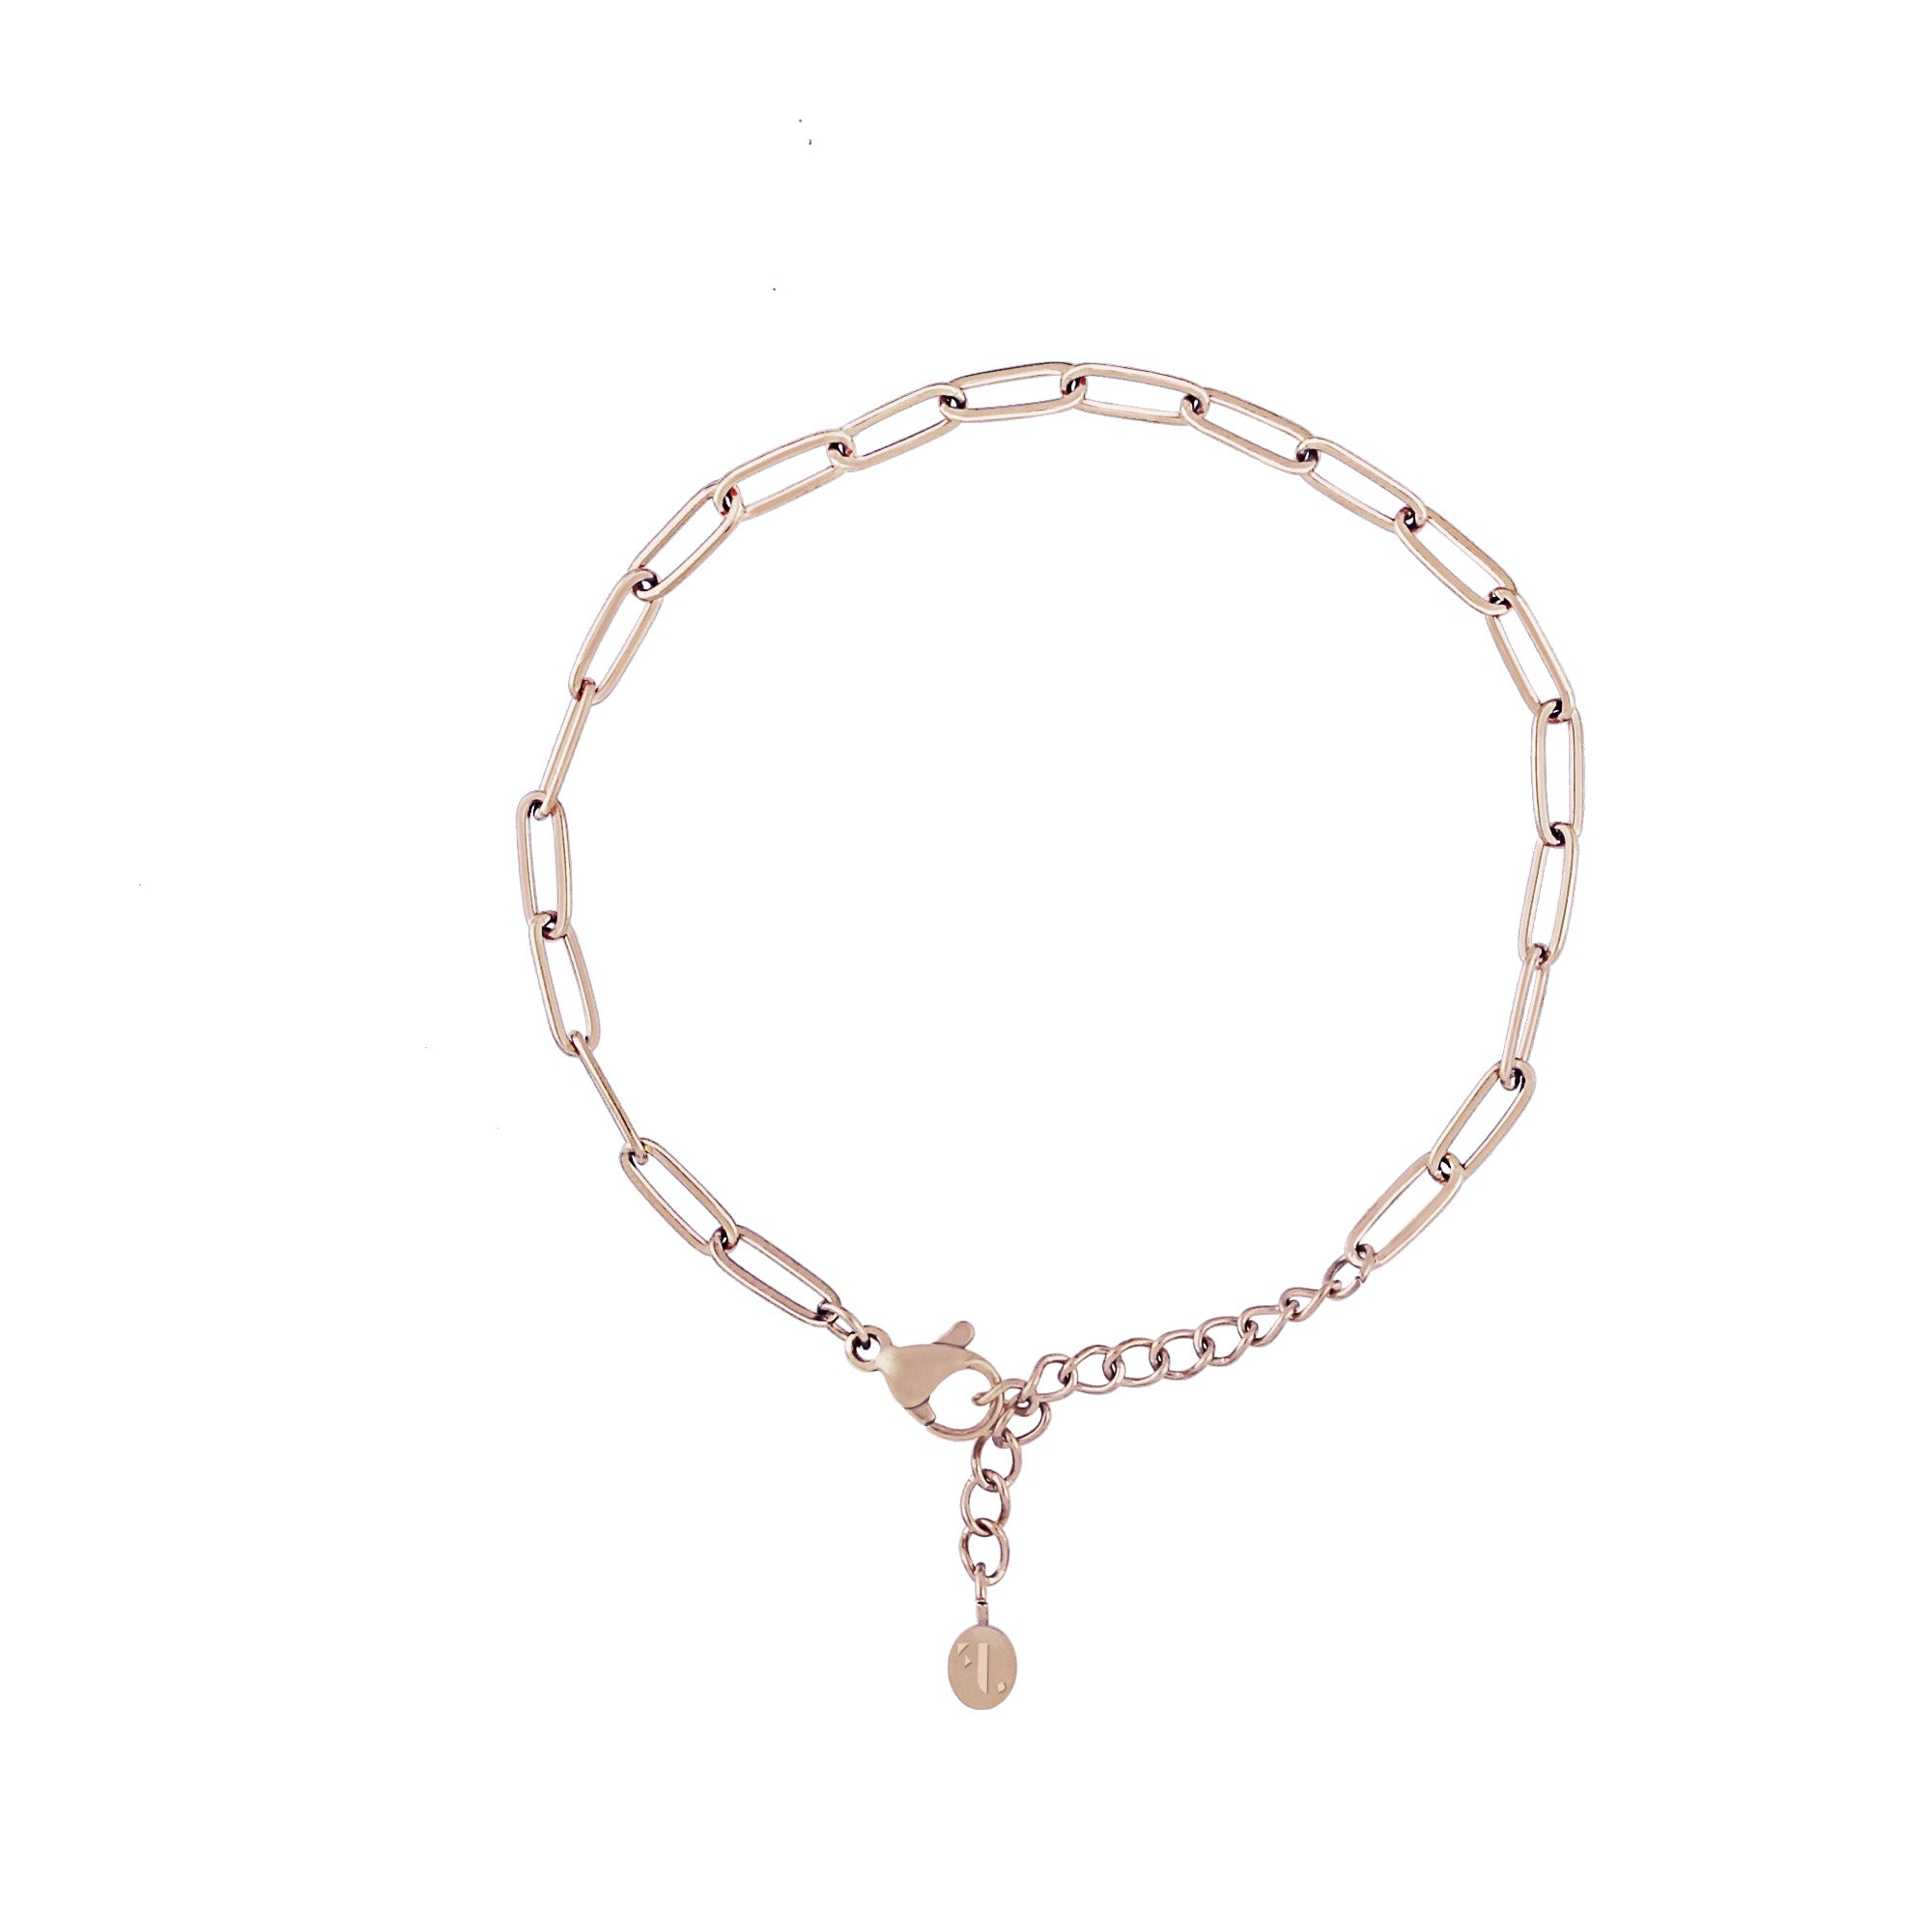 Maritsa bracelet by Five Jwlry for women, featuring an adjustable rose gold paperclip link chain ranging from 16cm to 20cm with its extension.